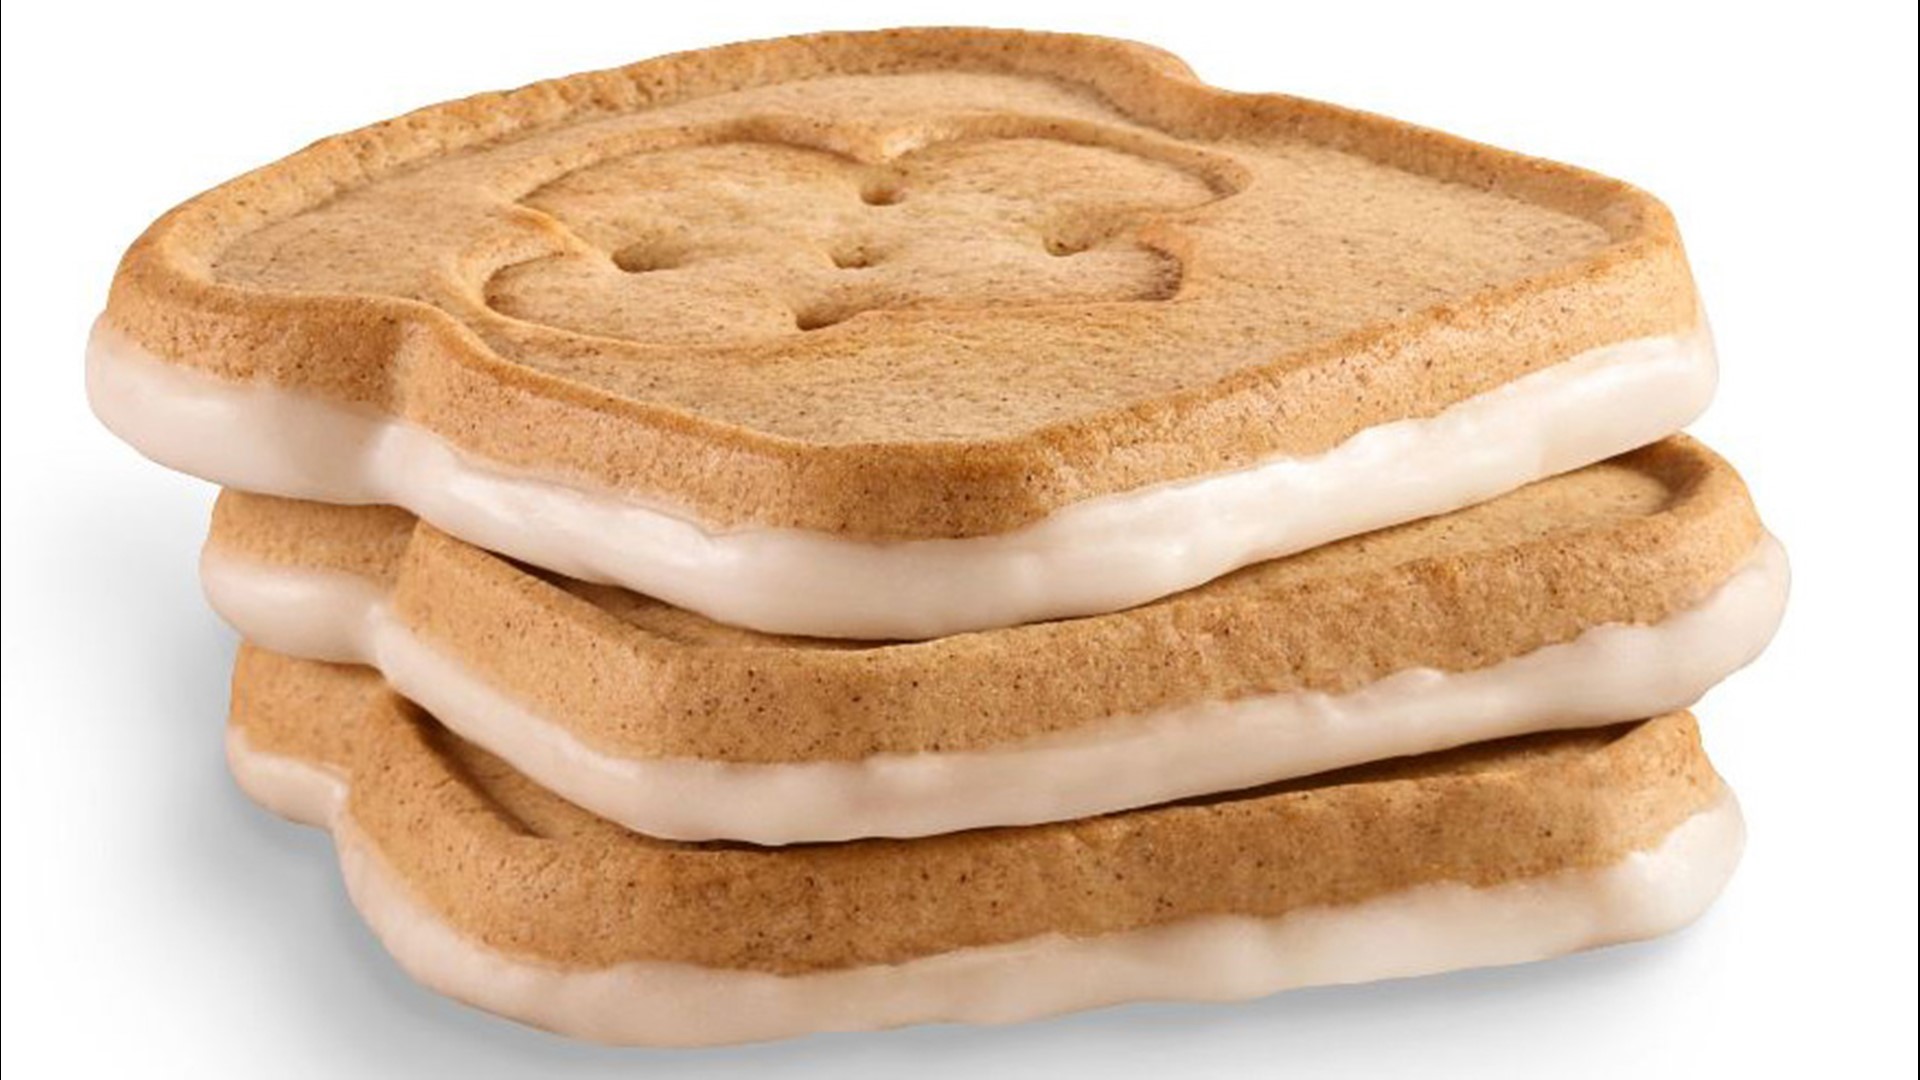 Move over Thin Mints, Caramel deLites and Peanut Butter Patties. This new cookie might just be the toast of the town.